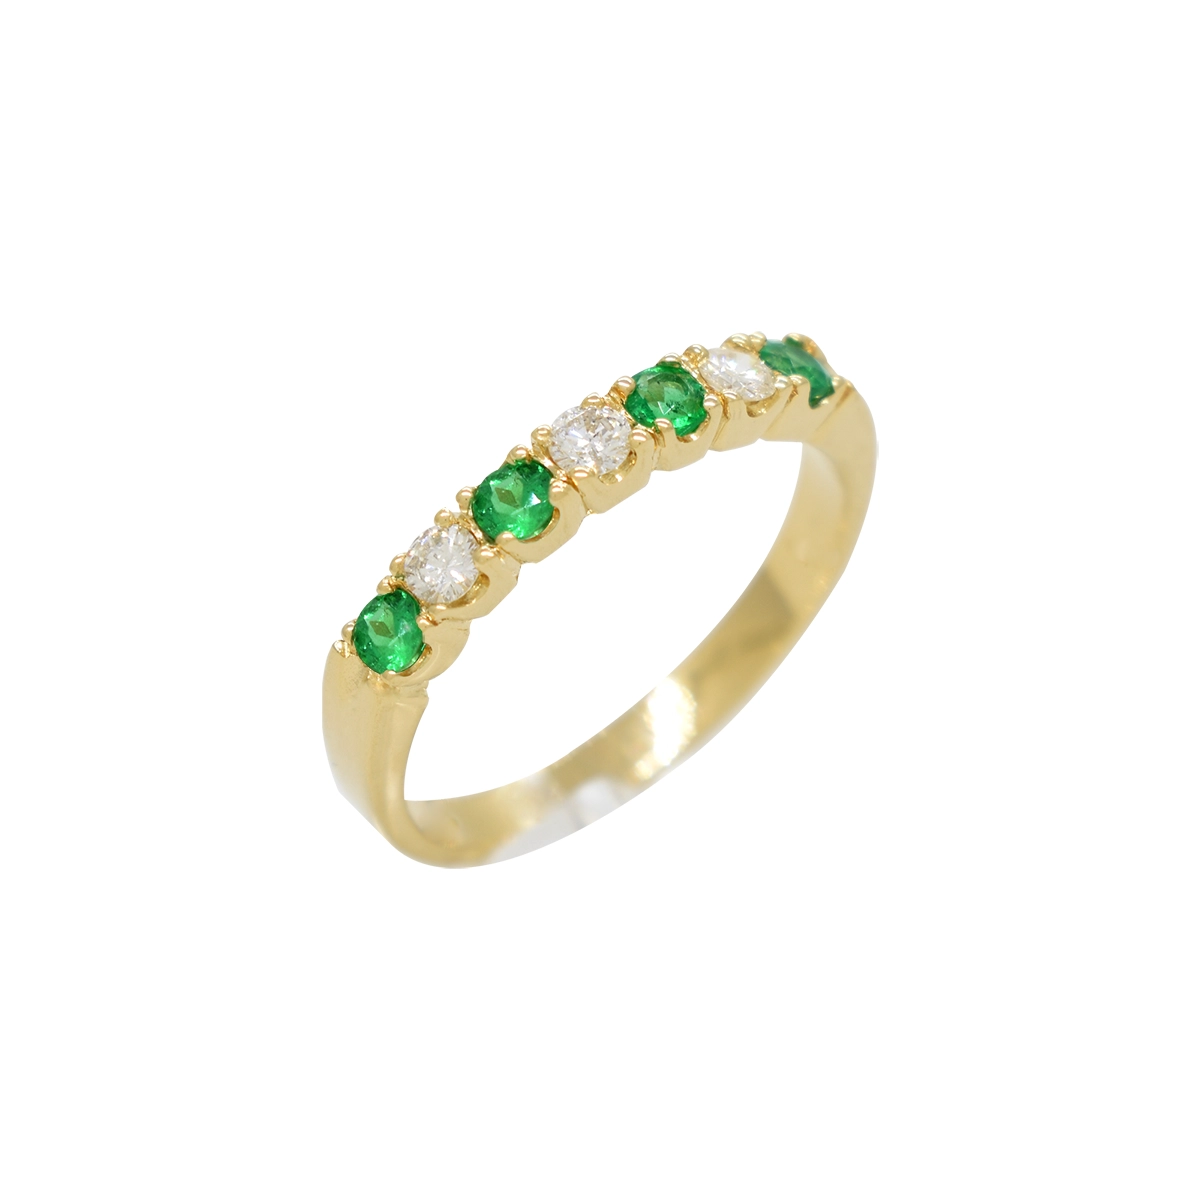 Emerald and diamond wedding band ring, custom made in 18K gold with 4 round cut natural emeralds in 0.24 Ct. t.w. and 3 round cut diamonds in 0.18 Ct. t.w.